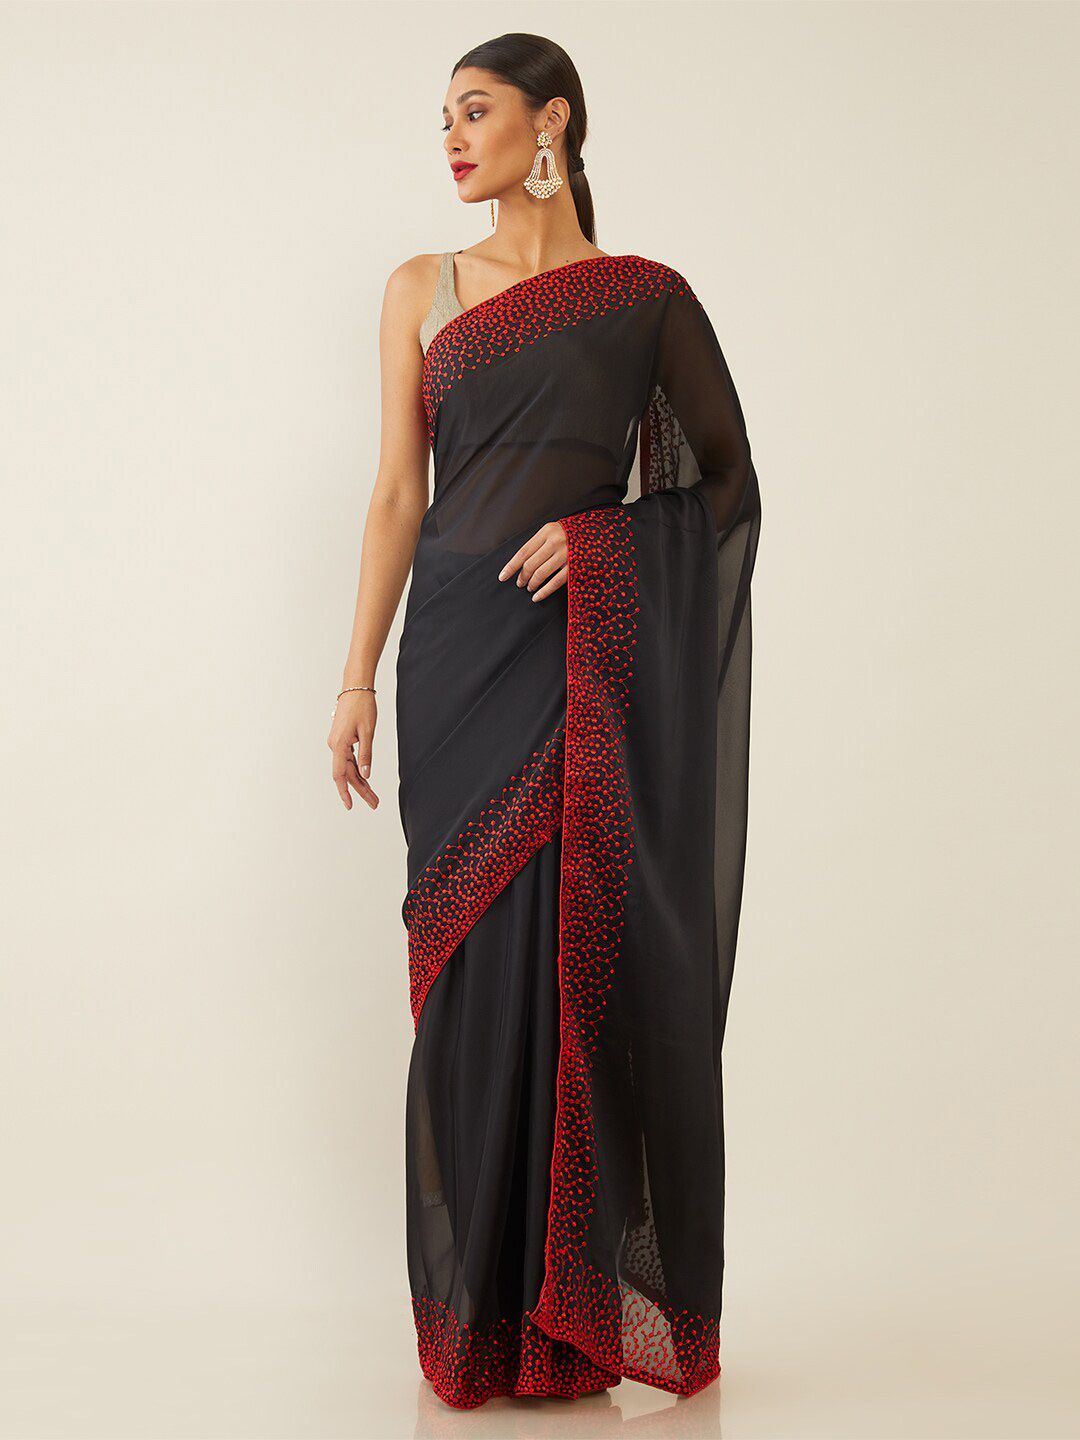 Soch Black & Red Embroidered Pure Georgette Saree Price in India